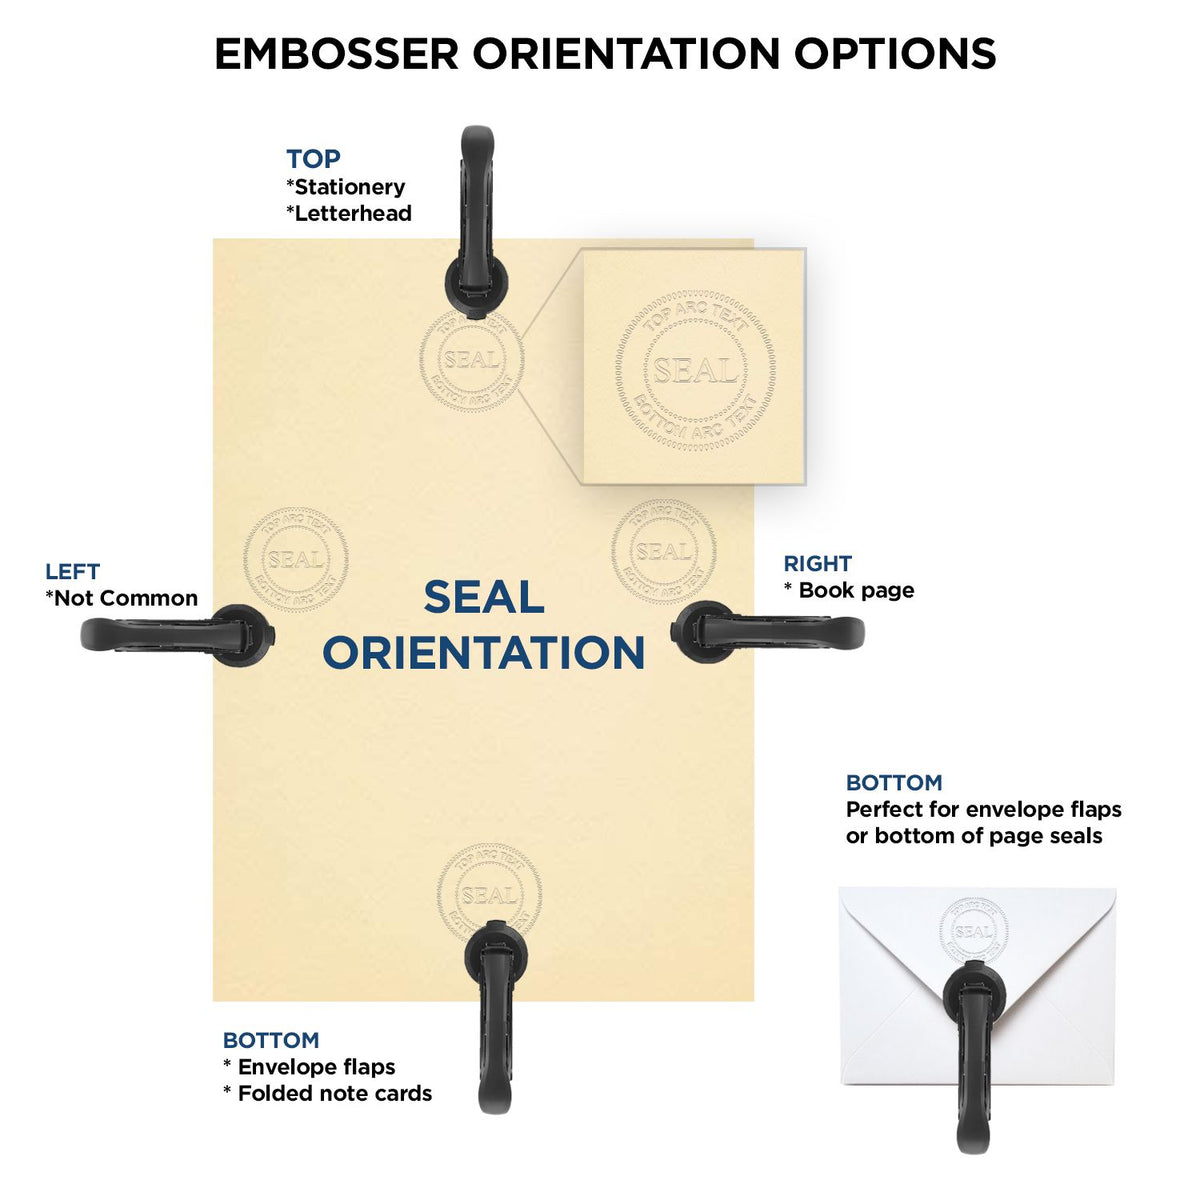 An infographic for the Heavy Duty Cast Iron Nebraska Land Surveyor Seal Embosser showing embosser orientation, this is showing examples of a top, bottom, right and left insert.